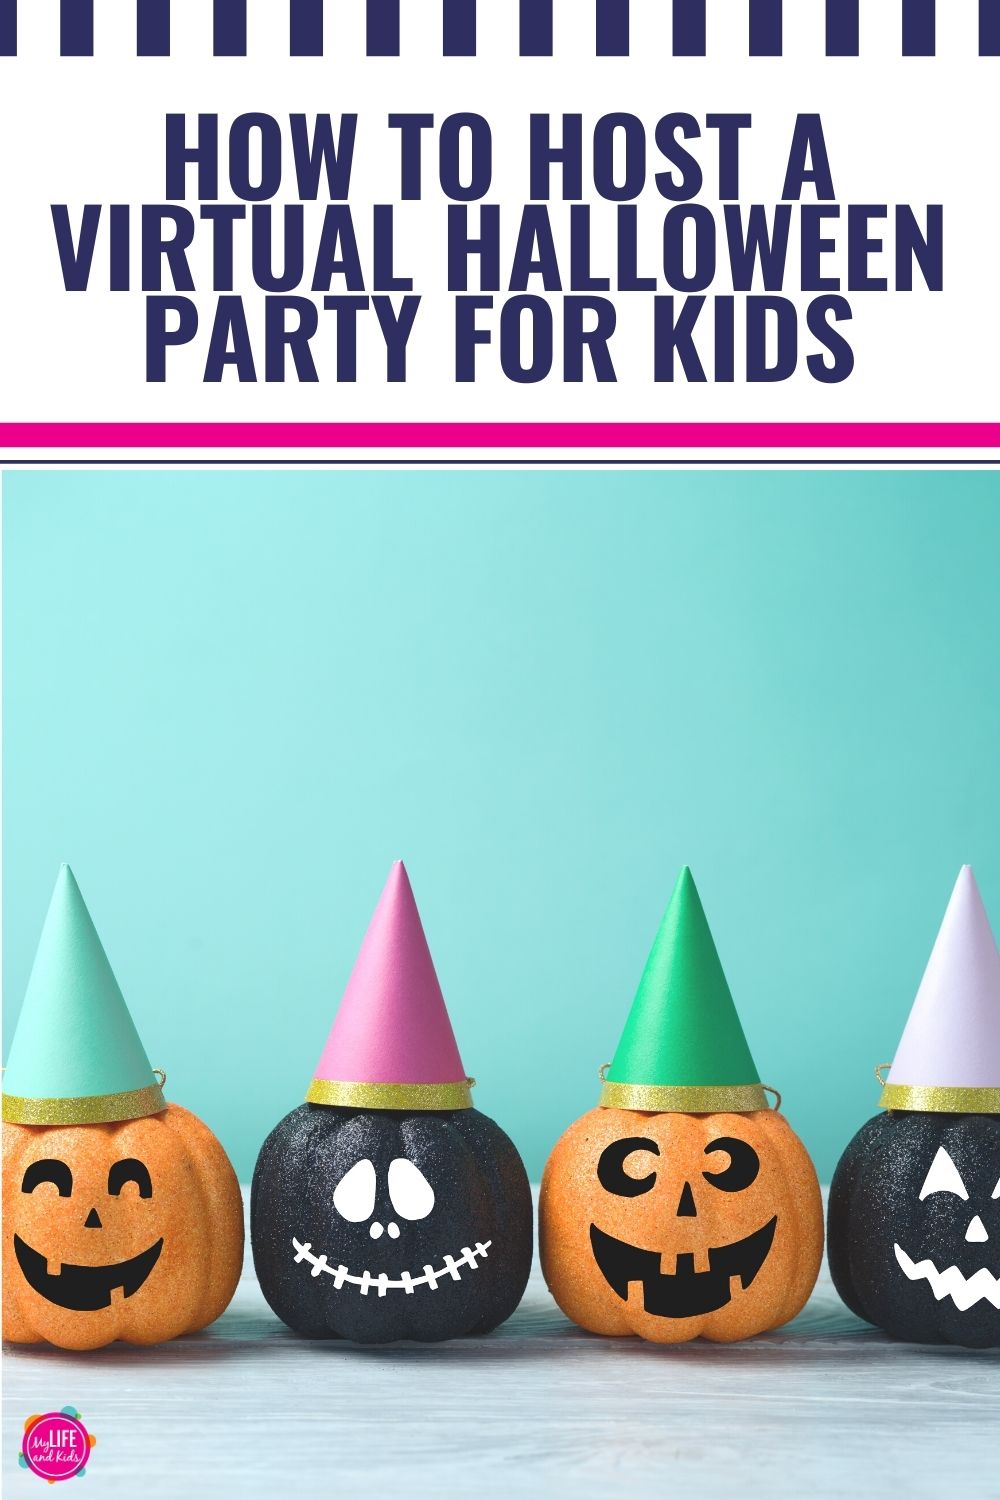 how-to-host-a-virtual-halloween-party-for-kids-with-halloween-games